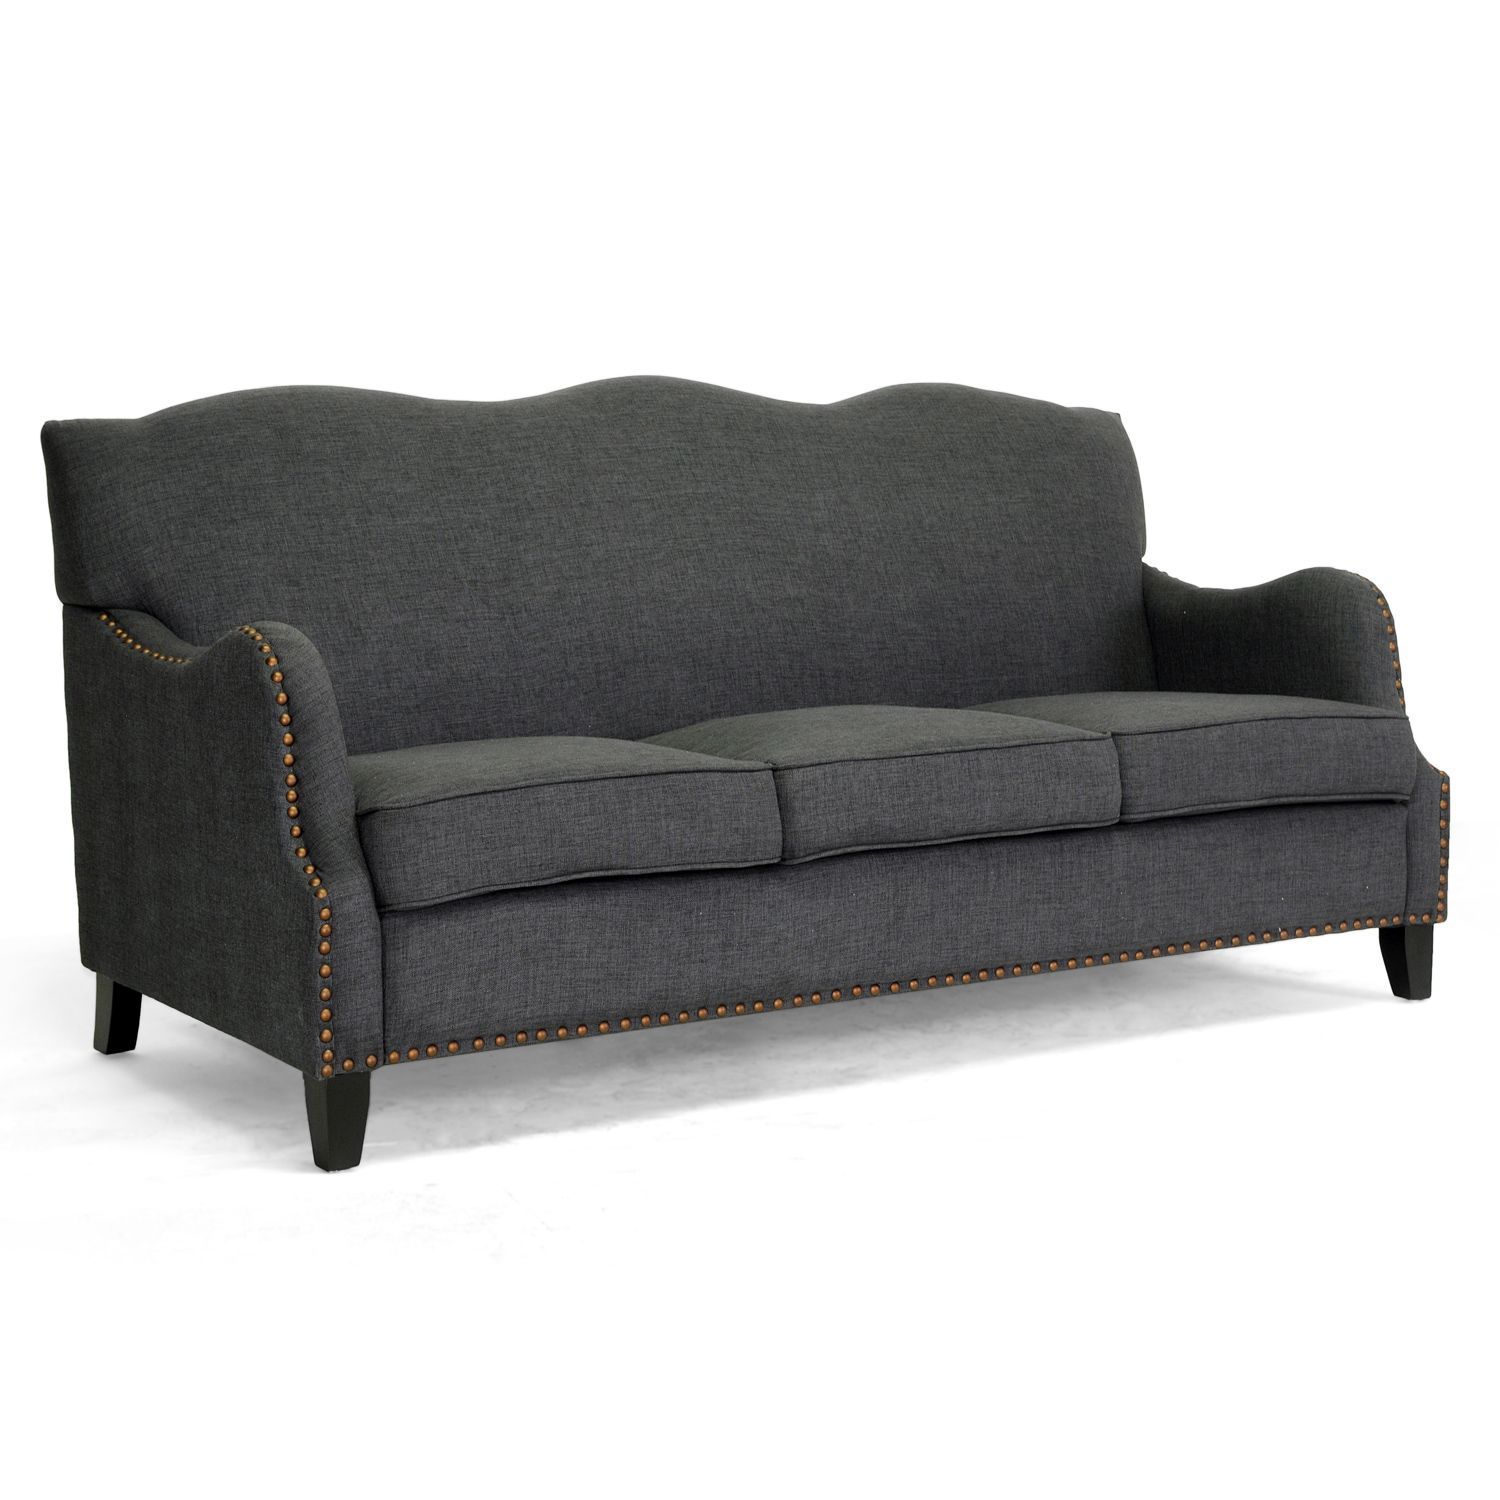 The Dark Charcoal Grey Linen Sofa Features Stylish Curves On The Regarding Gray Linen Sofas (Gallery 18 of 20)